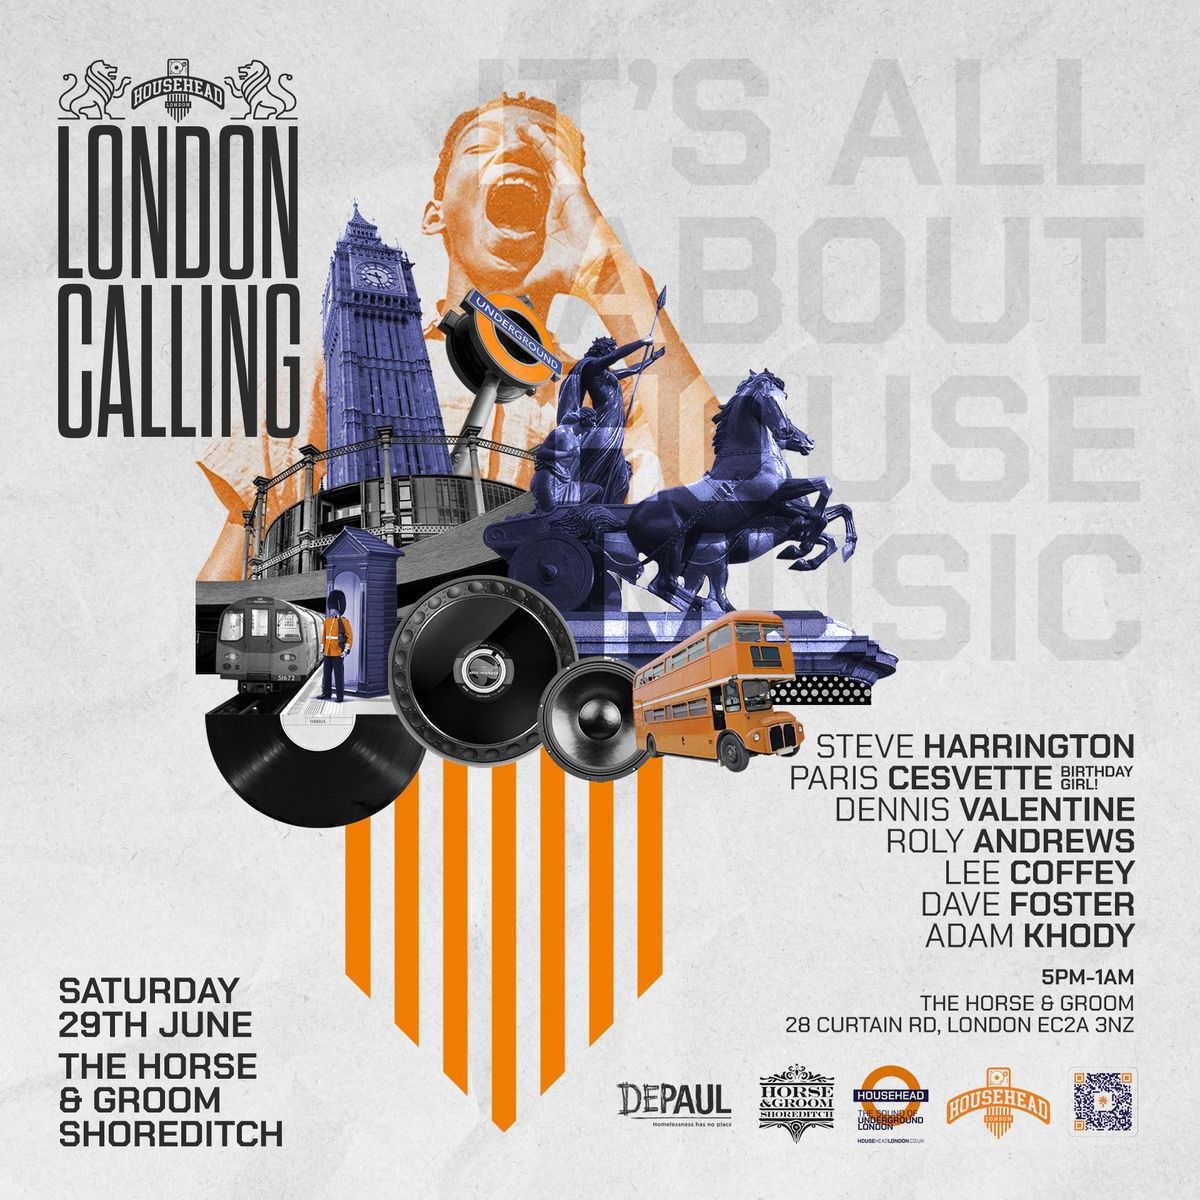 London Calling FREE PARTY